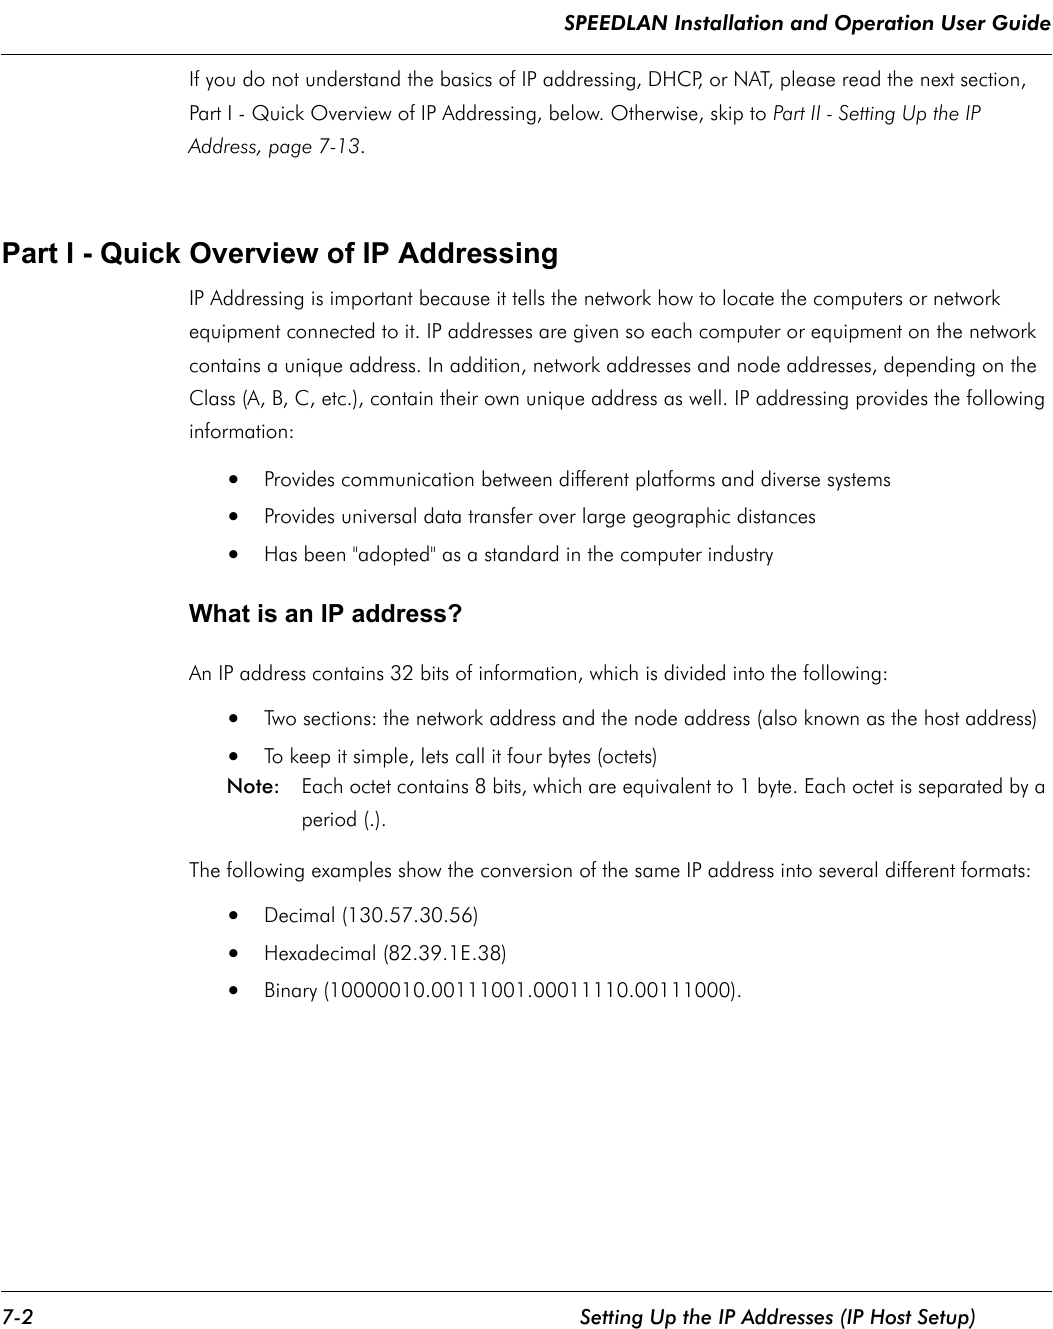 SPEEDLAN Installation and Operation User Guide 7-2 Setting Up the IP Addresses (IP Host Setup)If you do not understand the basics of IP addressing, DHCP, or NAT, please read the next section, Part I - Quick Overview of IP Addressing, below. Otherwise, skip to Part II - Setting Up the IP Address, page 7-13. Part I - Quick Overview of IP Addressing IP Addressing is important because it tells the network how to locate the computers or network equipment connected to it. IP addresses are given so each computer or equipment on the network contains a unique address. In addition, network addresses and node addresses, depending on the Class (A, B, C, etc.), contain their own unique address as well. IP addressing provides the following information: •Provides communication between different platforms and diverse systems •Provides universal data transfer over large geographic distances •Has been &quot;adopted&quot; as a standard in the computer industry What is an IP address? An IP address contains 32 bits of information, which is divided into the following: •Two sections: the network address and the node address (also known as the host address) •To keep it simple, lets call it four bytes (octets) Note:  Each octet contains 8 bits, which are equivalent to 1 byte. Each octet is separated by a period (.).The following examples show the conversion of the same IP address into several different formats: •Decimal (130.57.30.56) •Hexadecimal (82.39.1E.38)•Binary (10000010.00111001.00011110.00111000).              